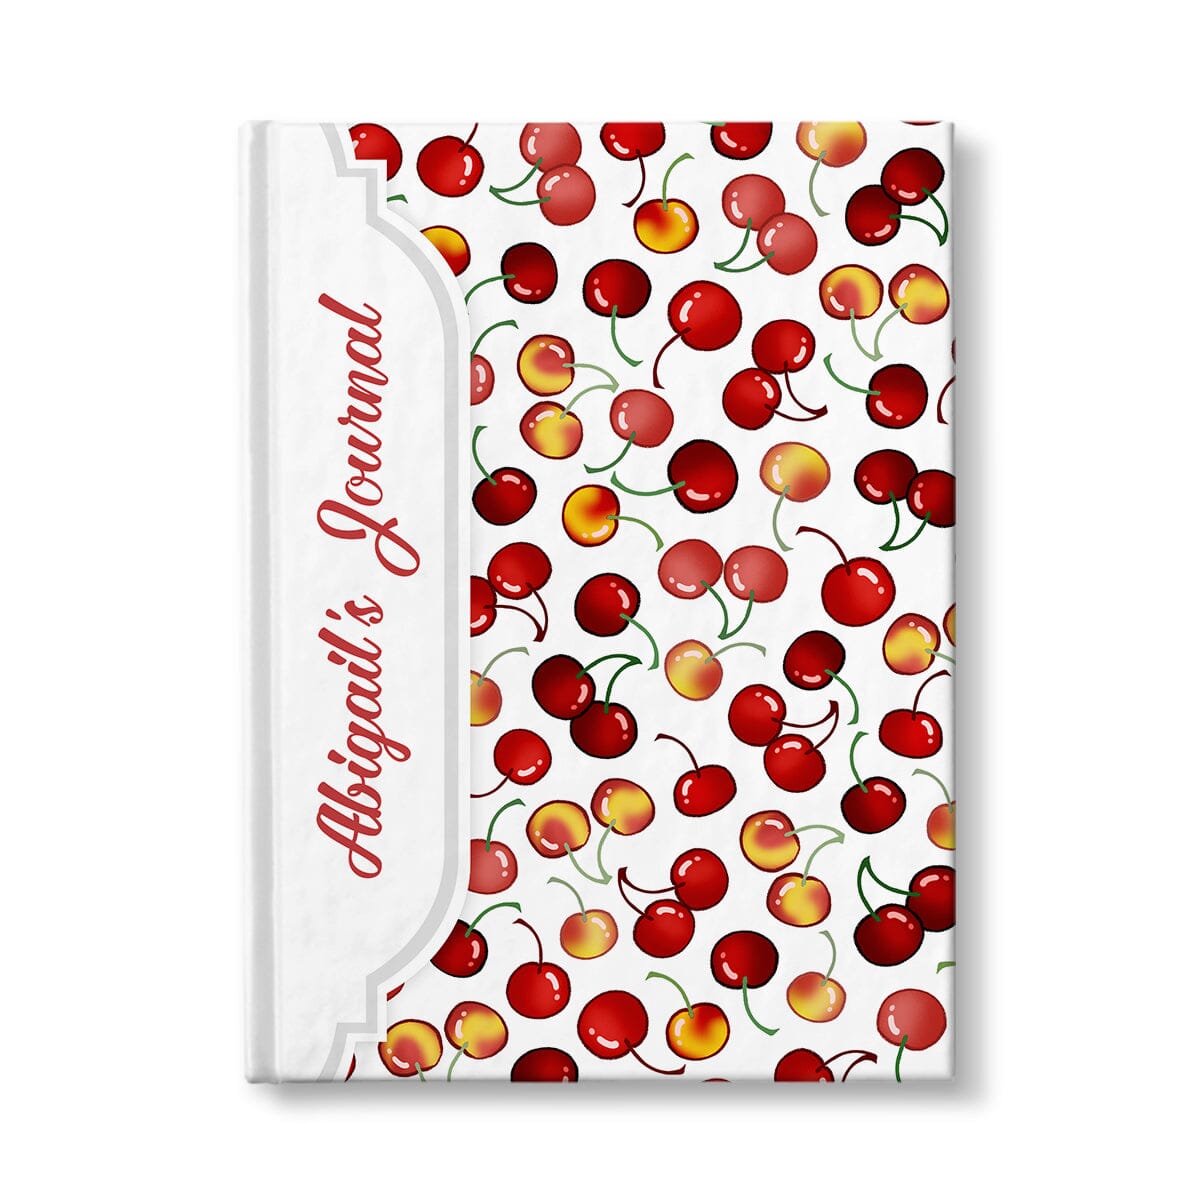 Personalized Cherries Journal at Artistically Invited.